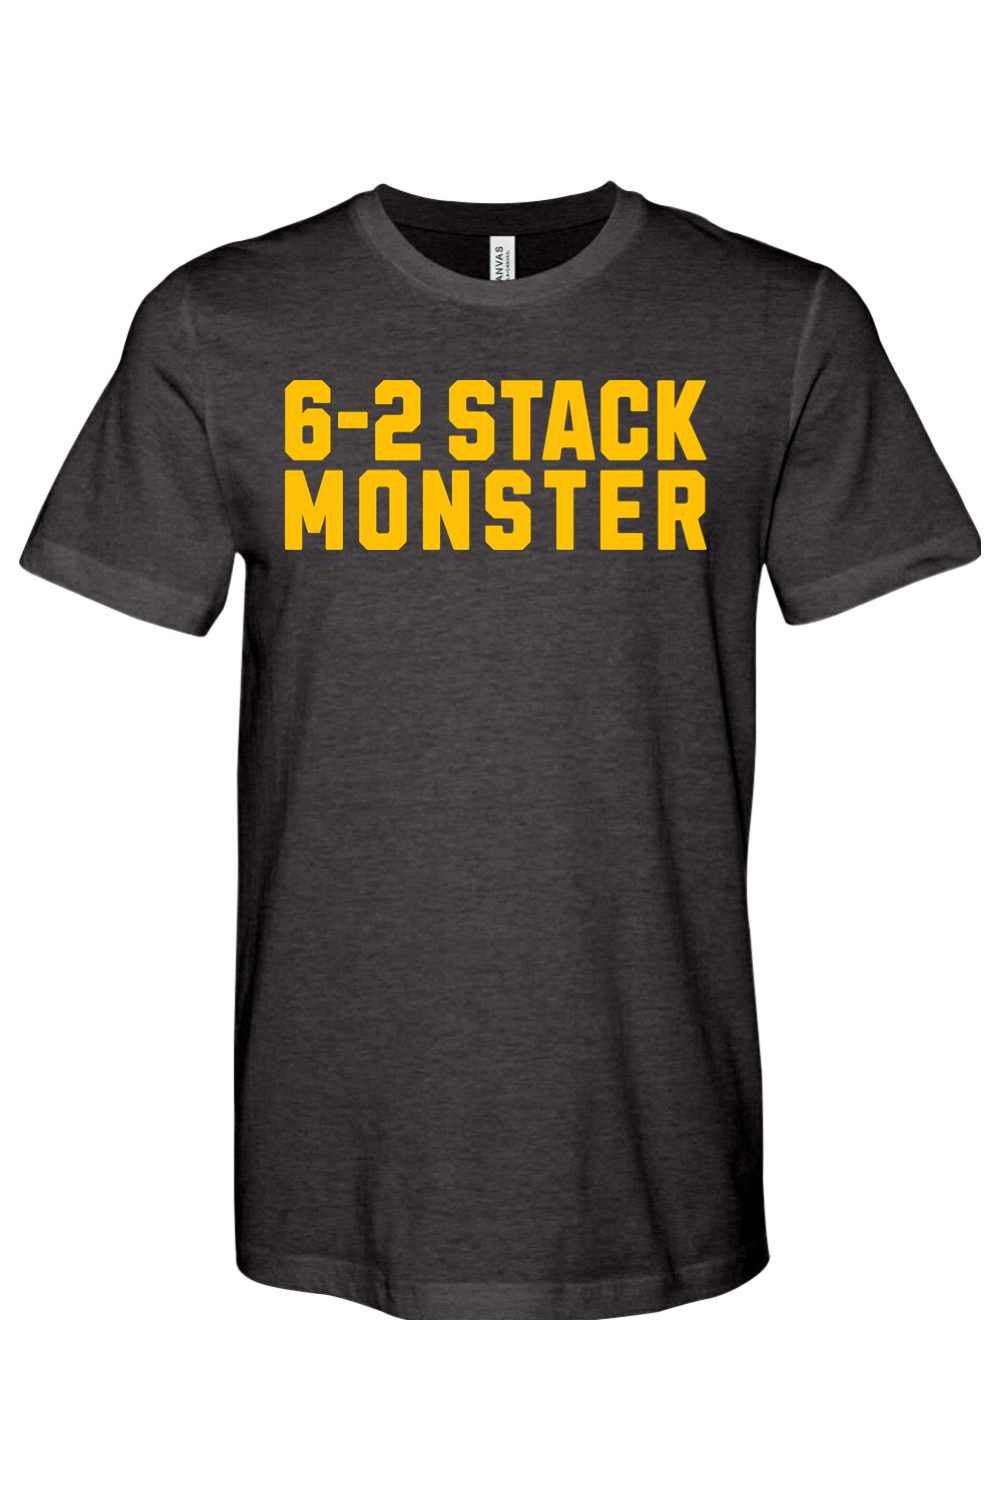 6-2 Stack Monster (All The Right Moves)